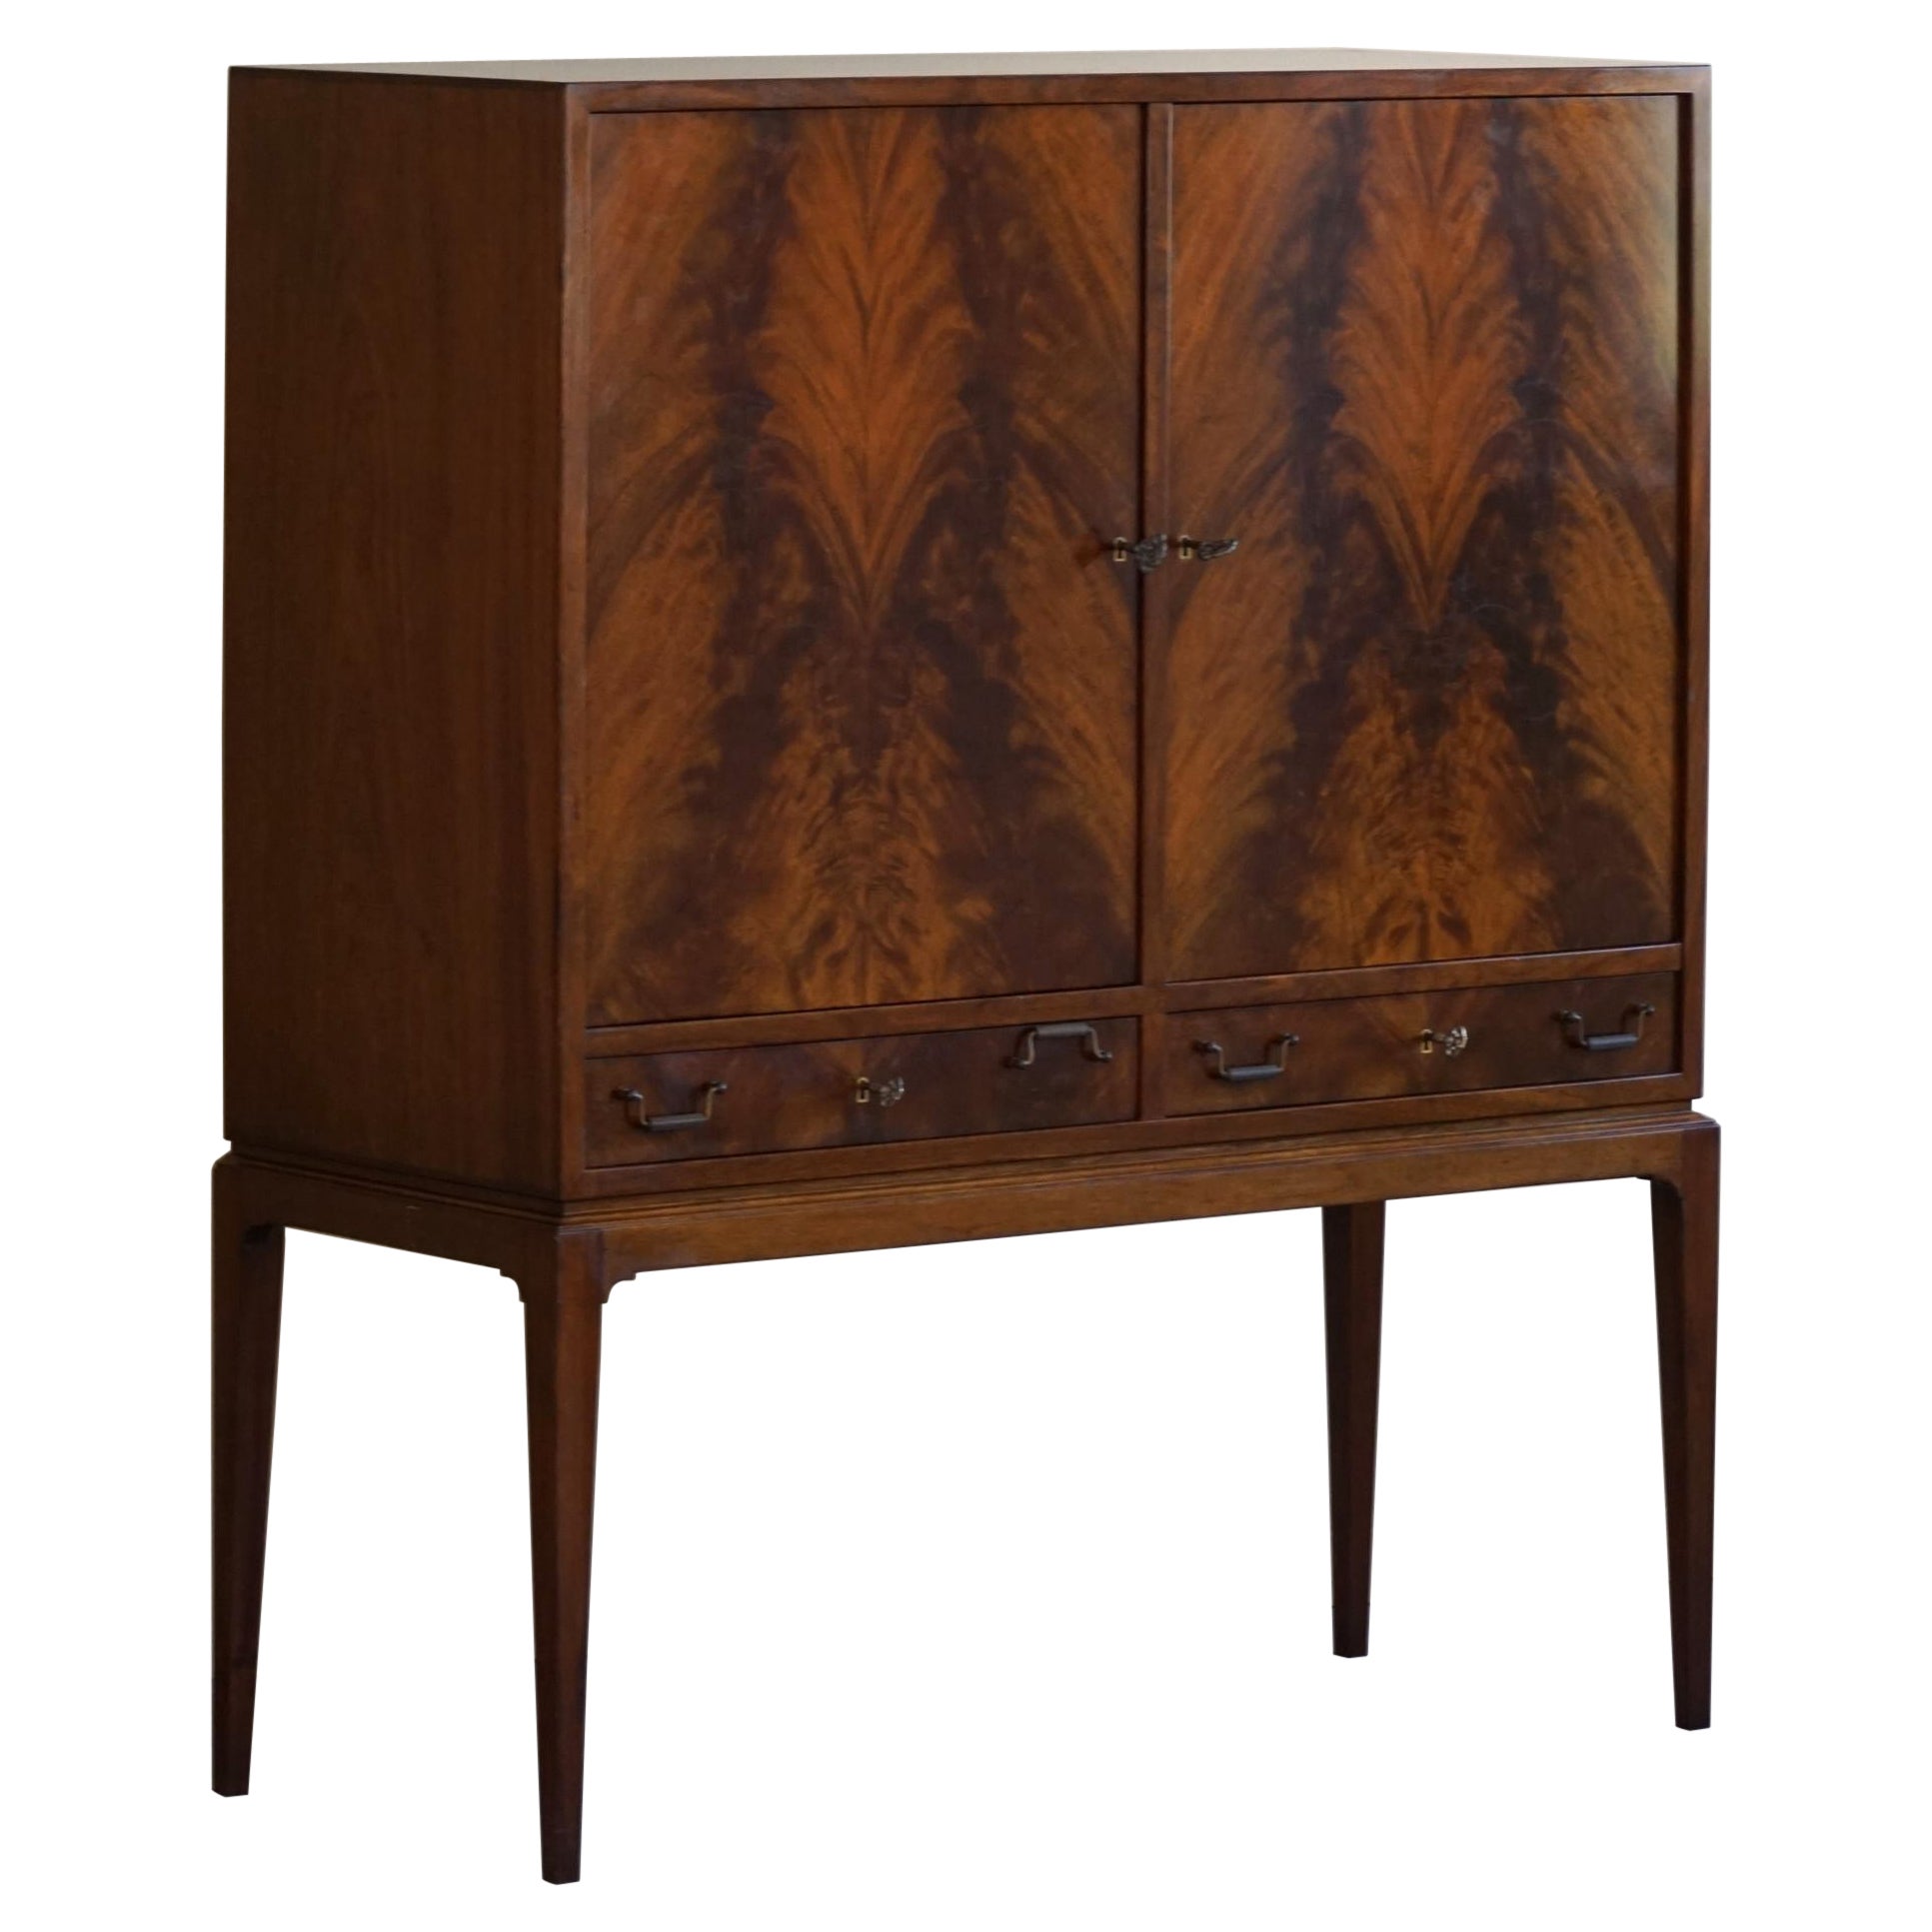 Classic Walnut Cabinet, Made by a Danish Cabinetmaker, Midcentury, 1950s